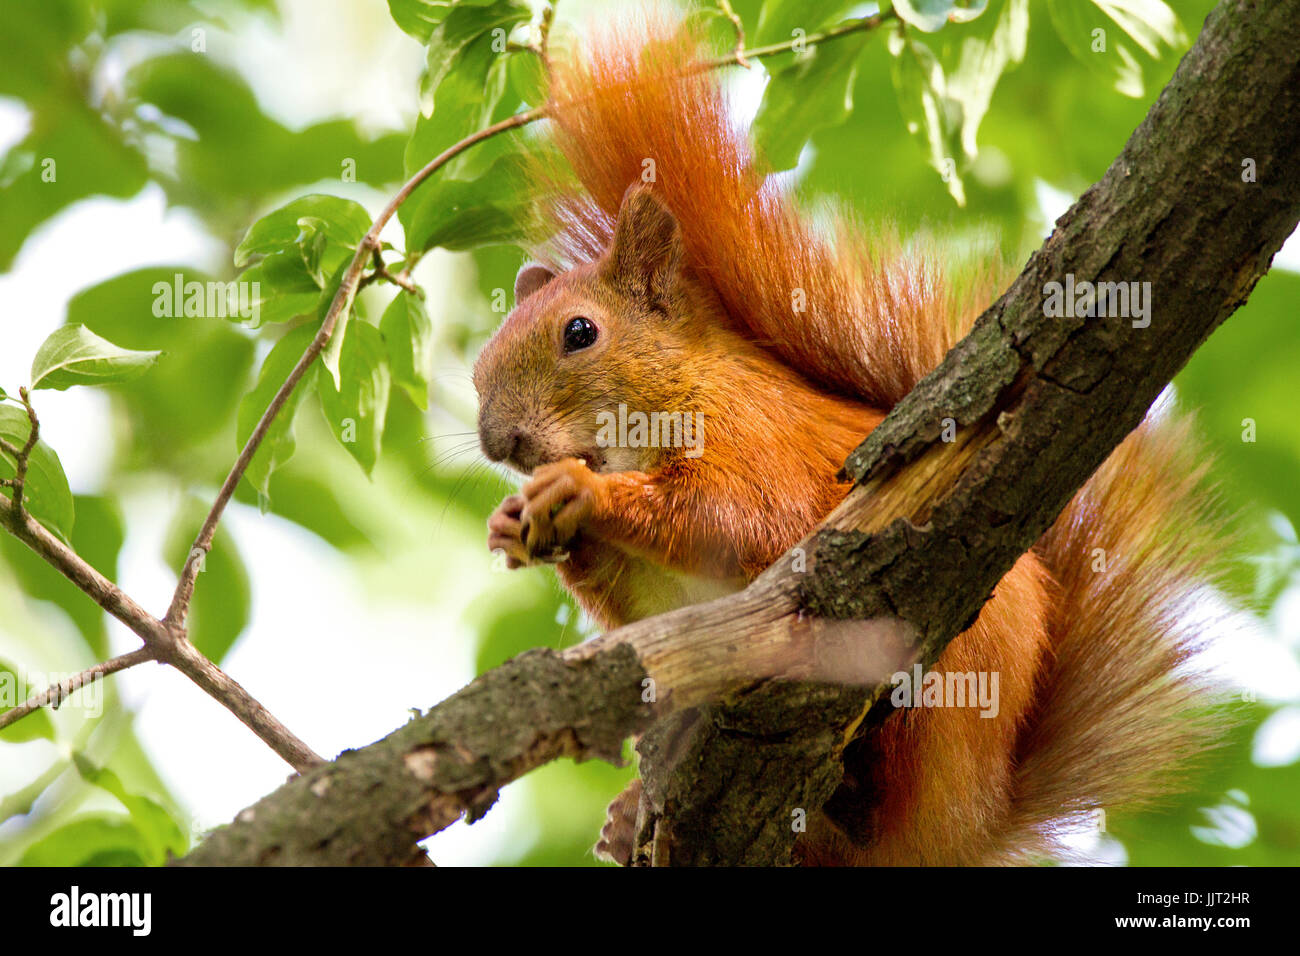 An image of a wild animal a squirrel on a tree eats Stock Photo